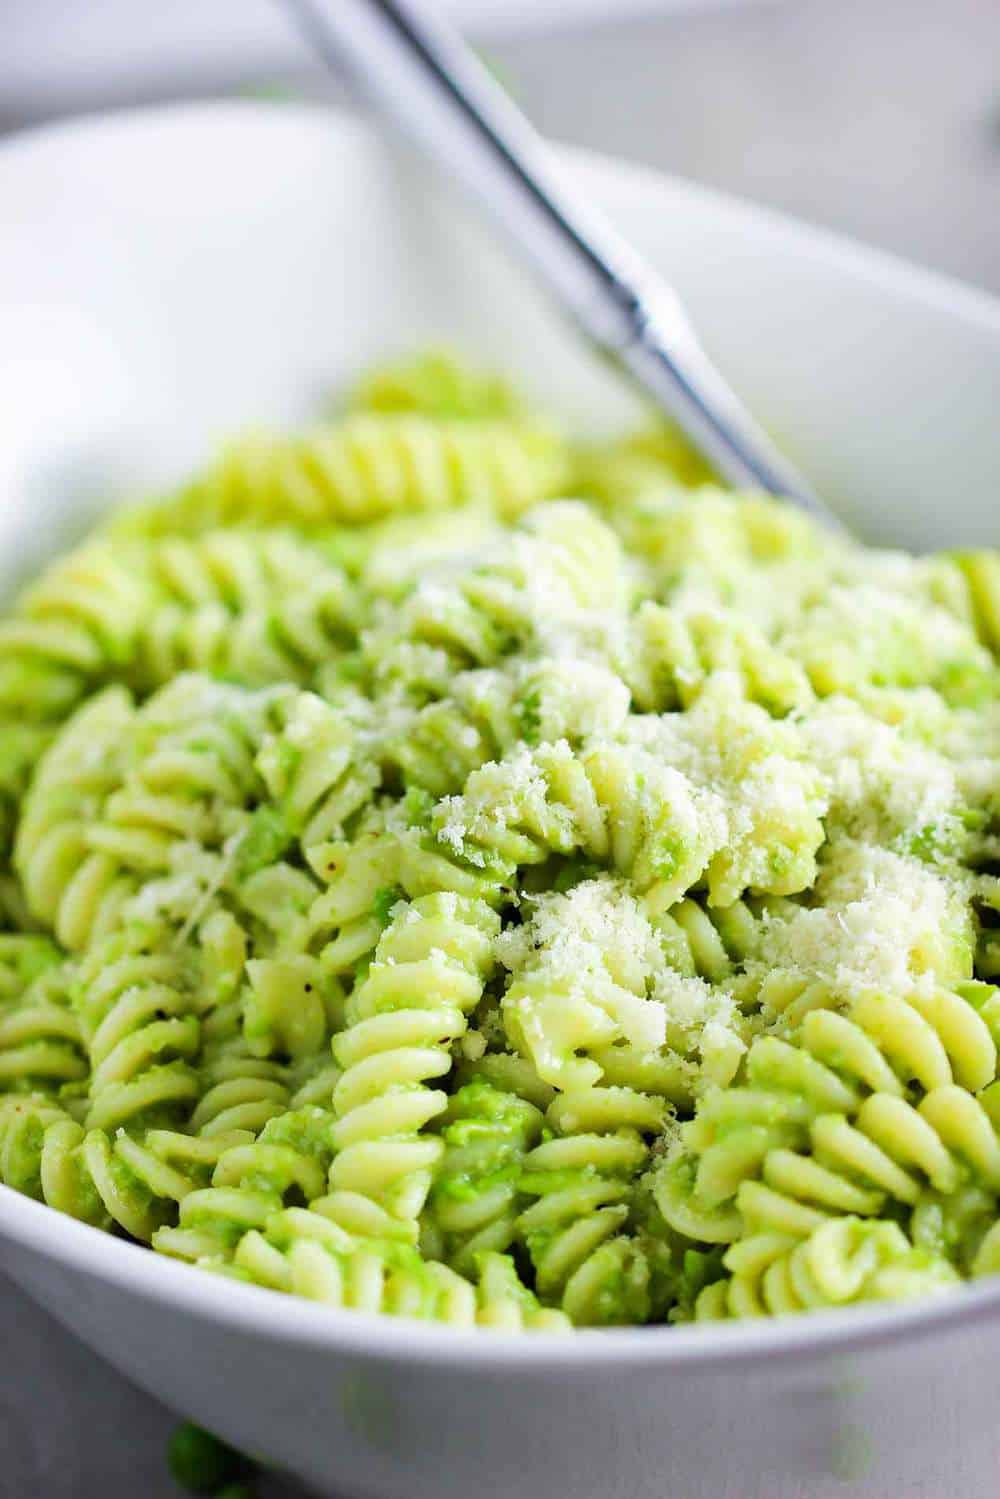 This pea pesto with fusilli is in a bowl ready to be served.